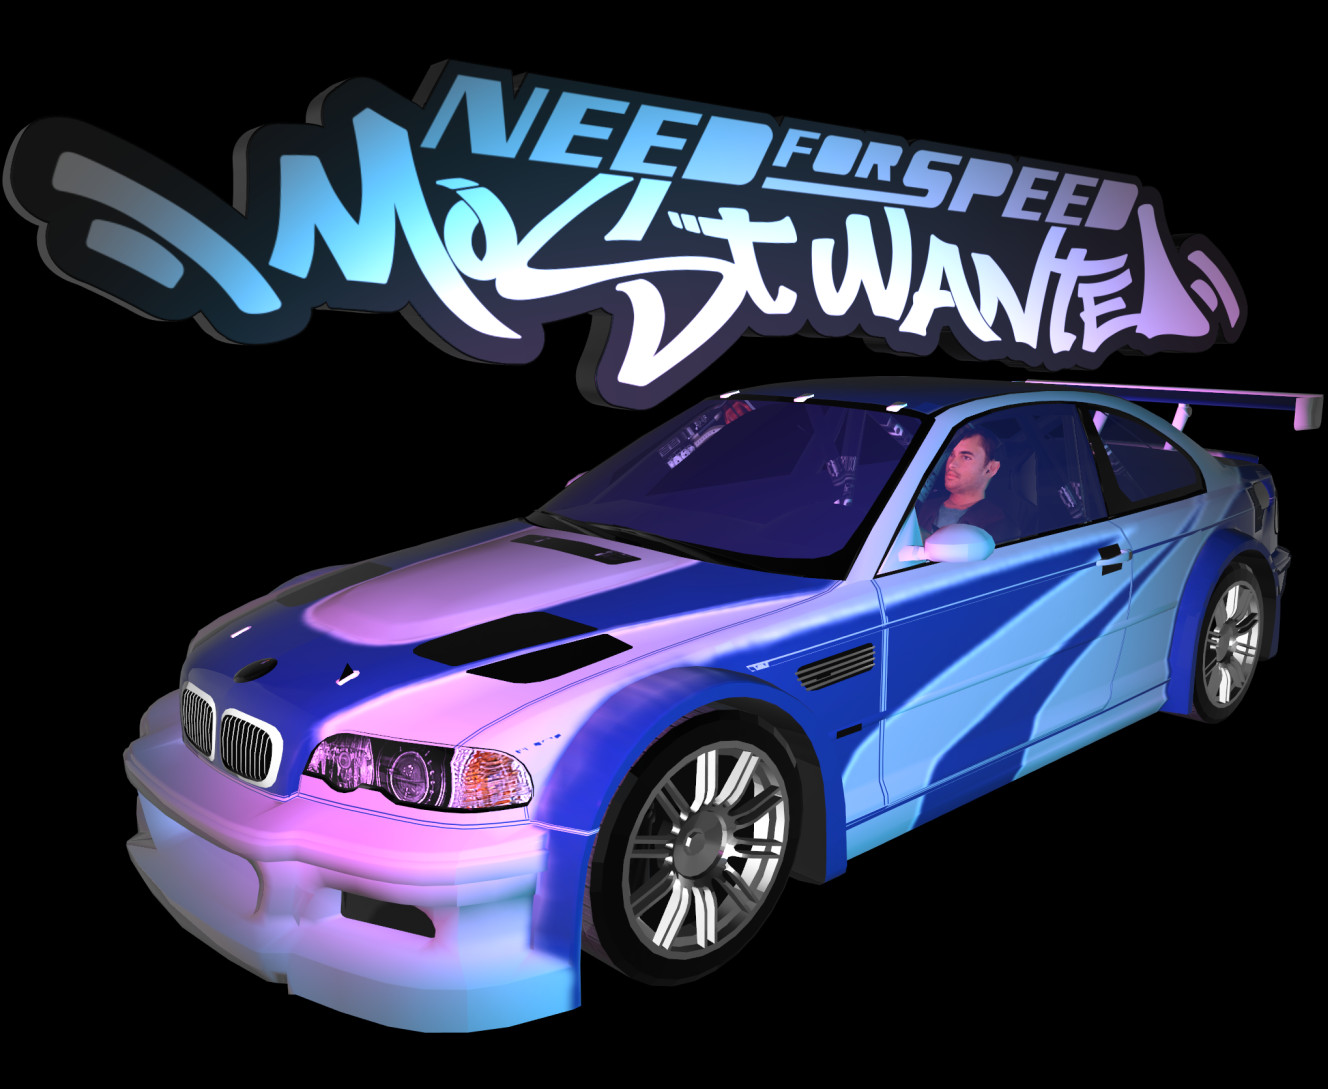 NFS Most Wanted neon bmw